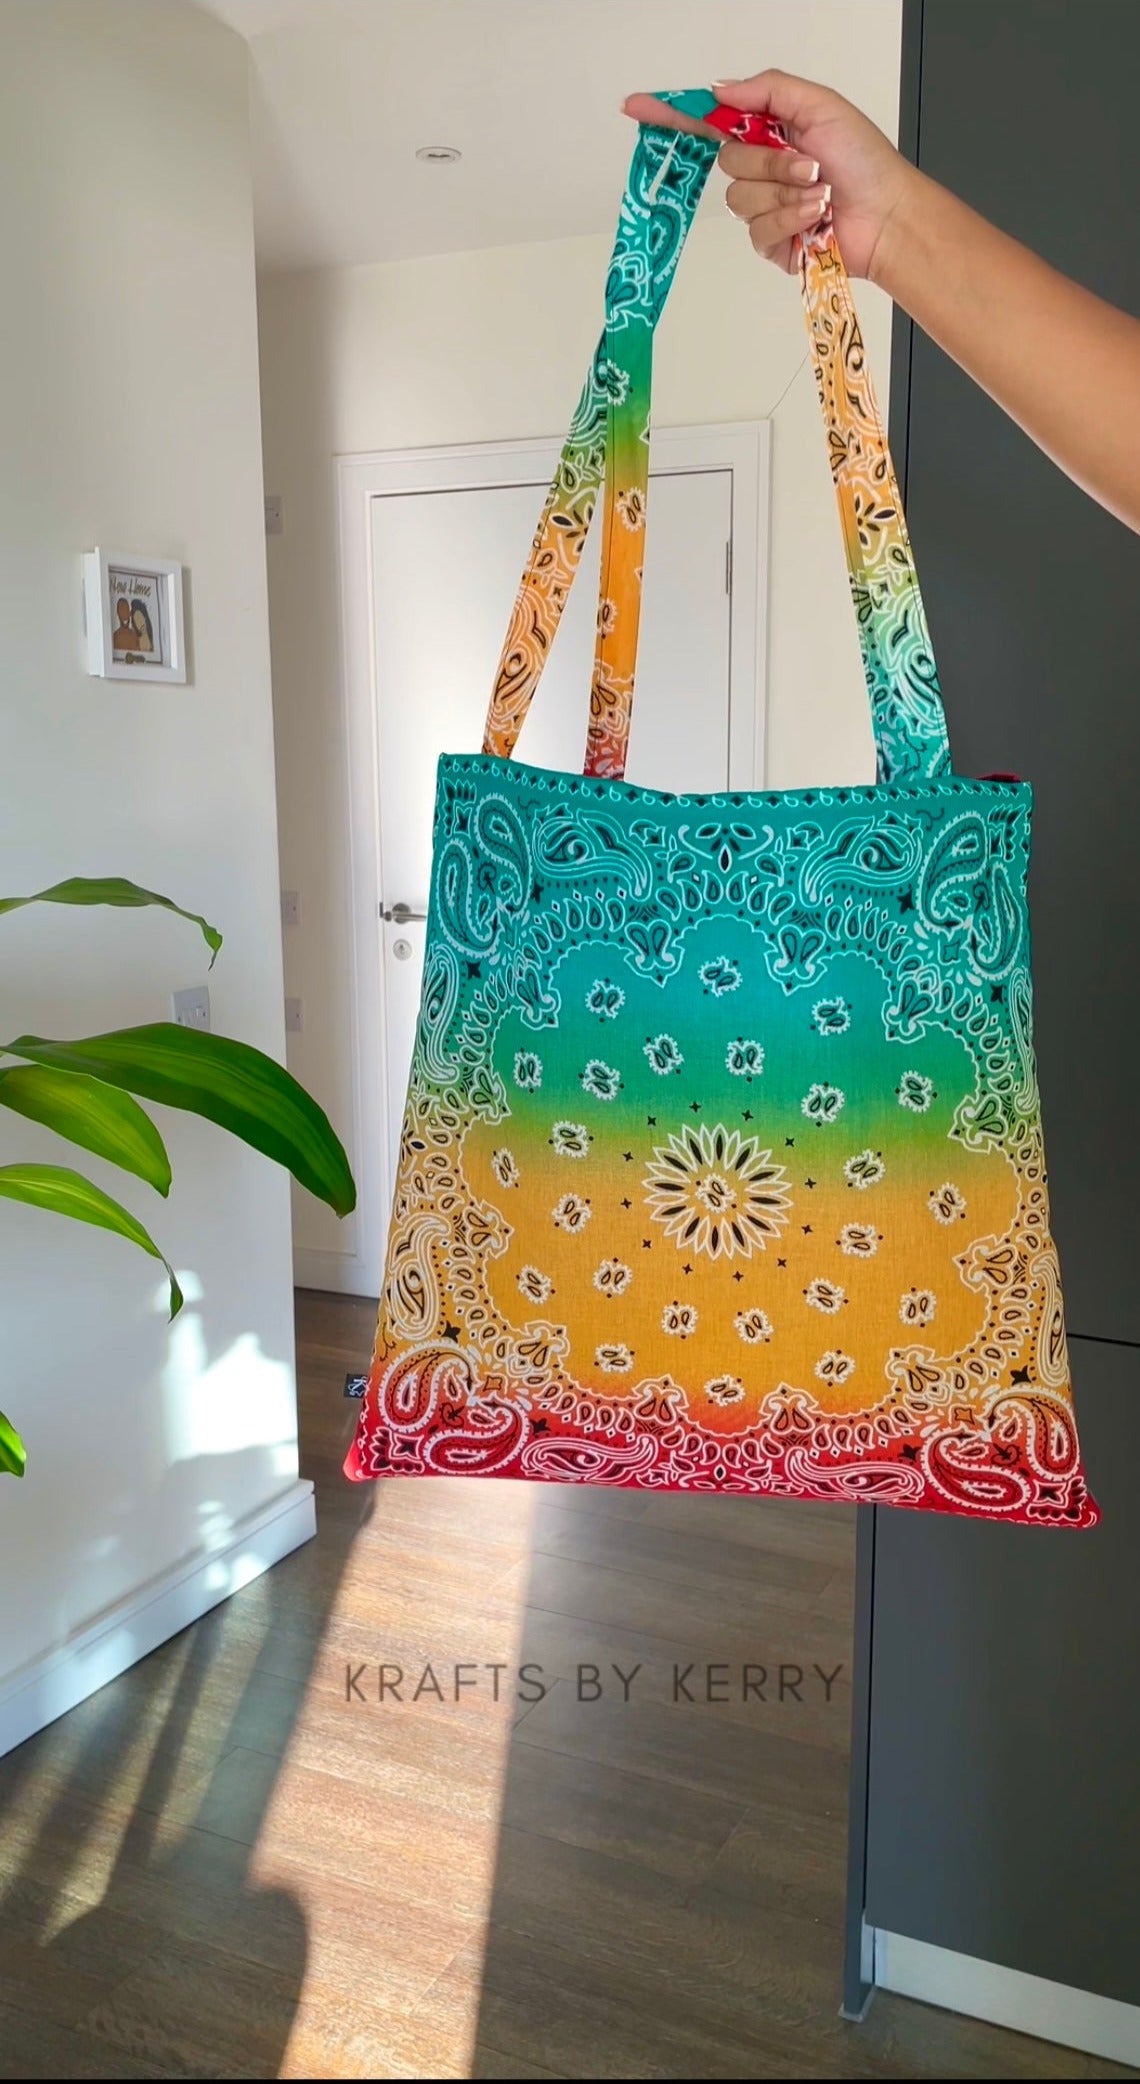 Krafts by Kerry ‘One Love’ Tote Bag